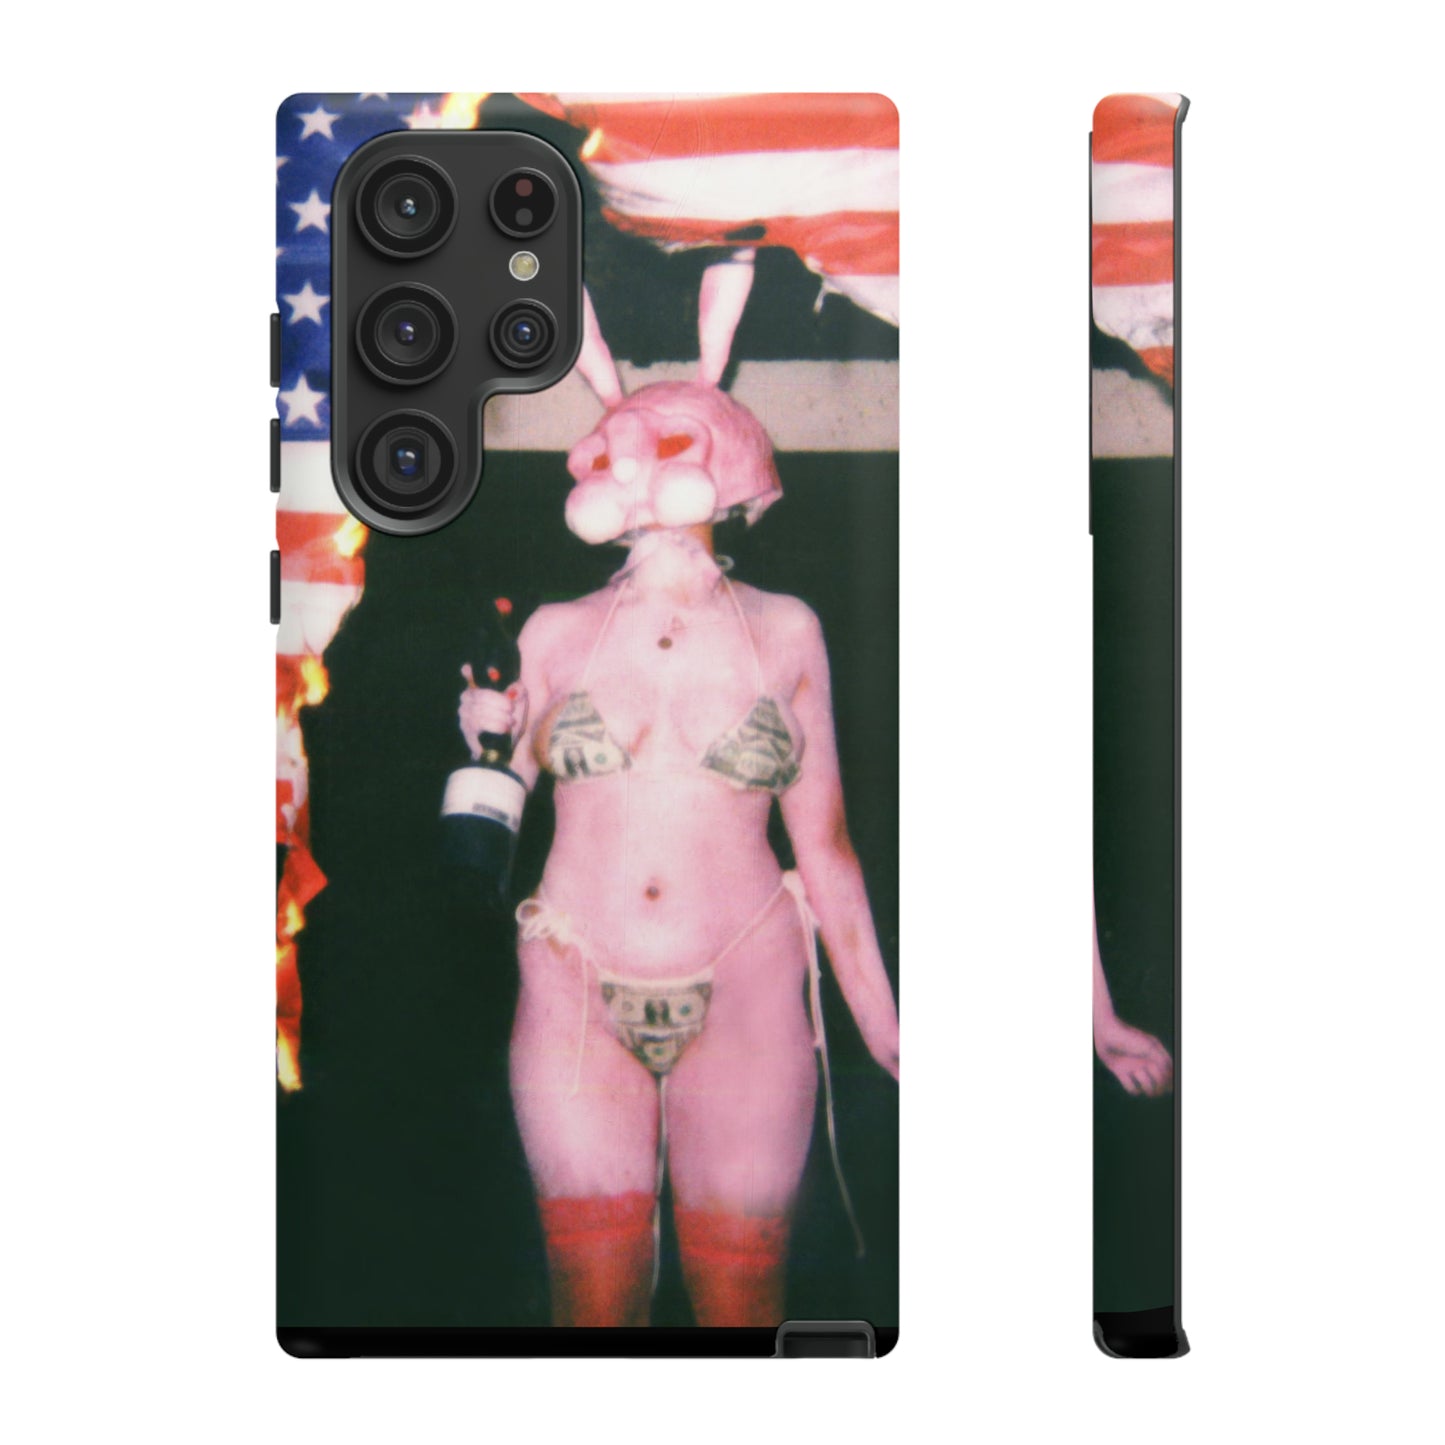 The Bunny Bless America Tough iPhone case